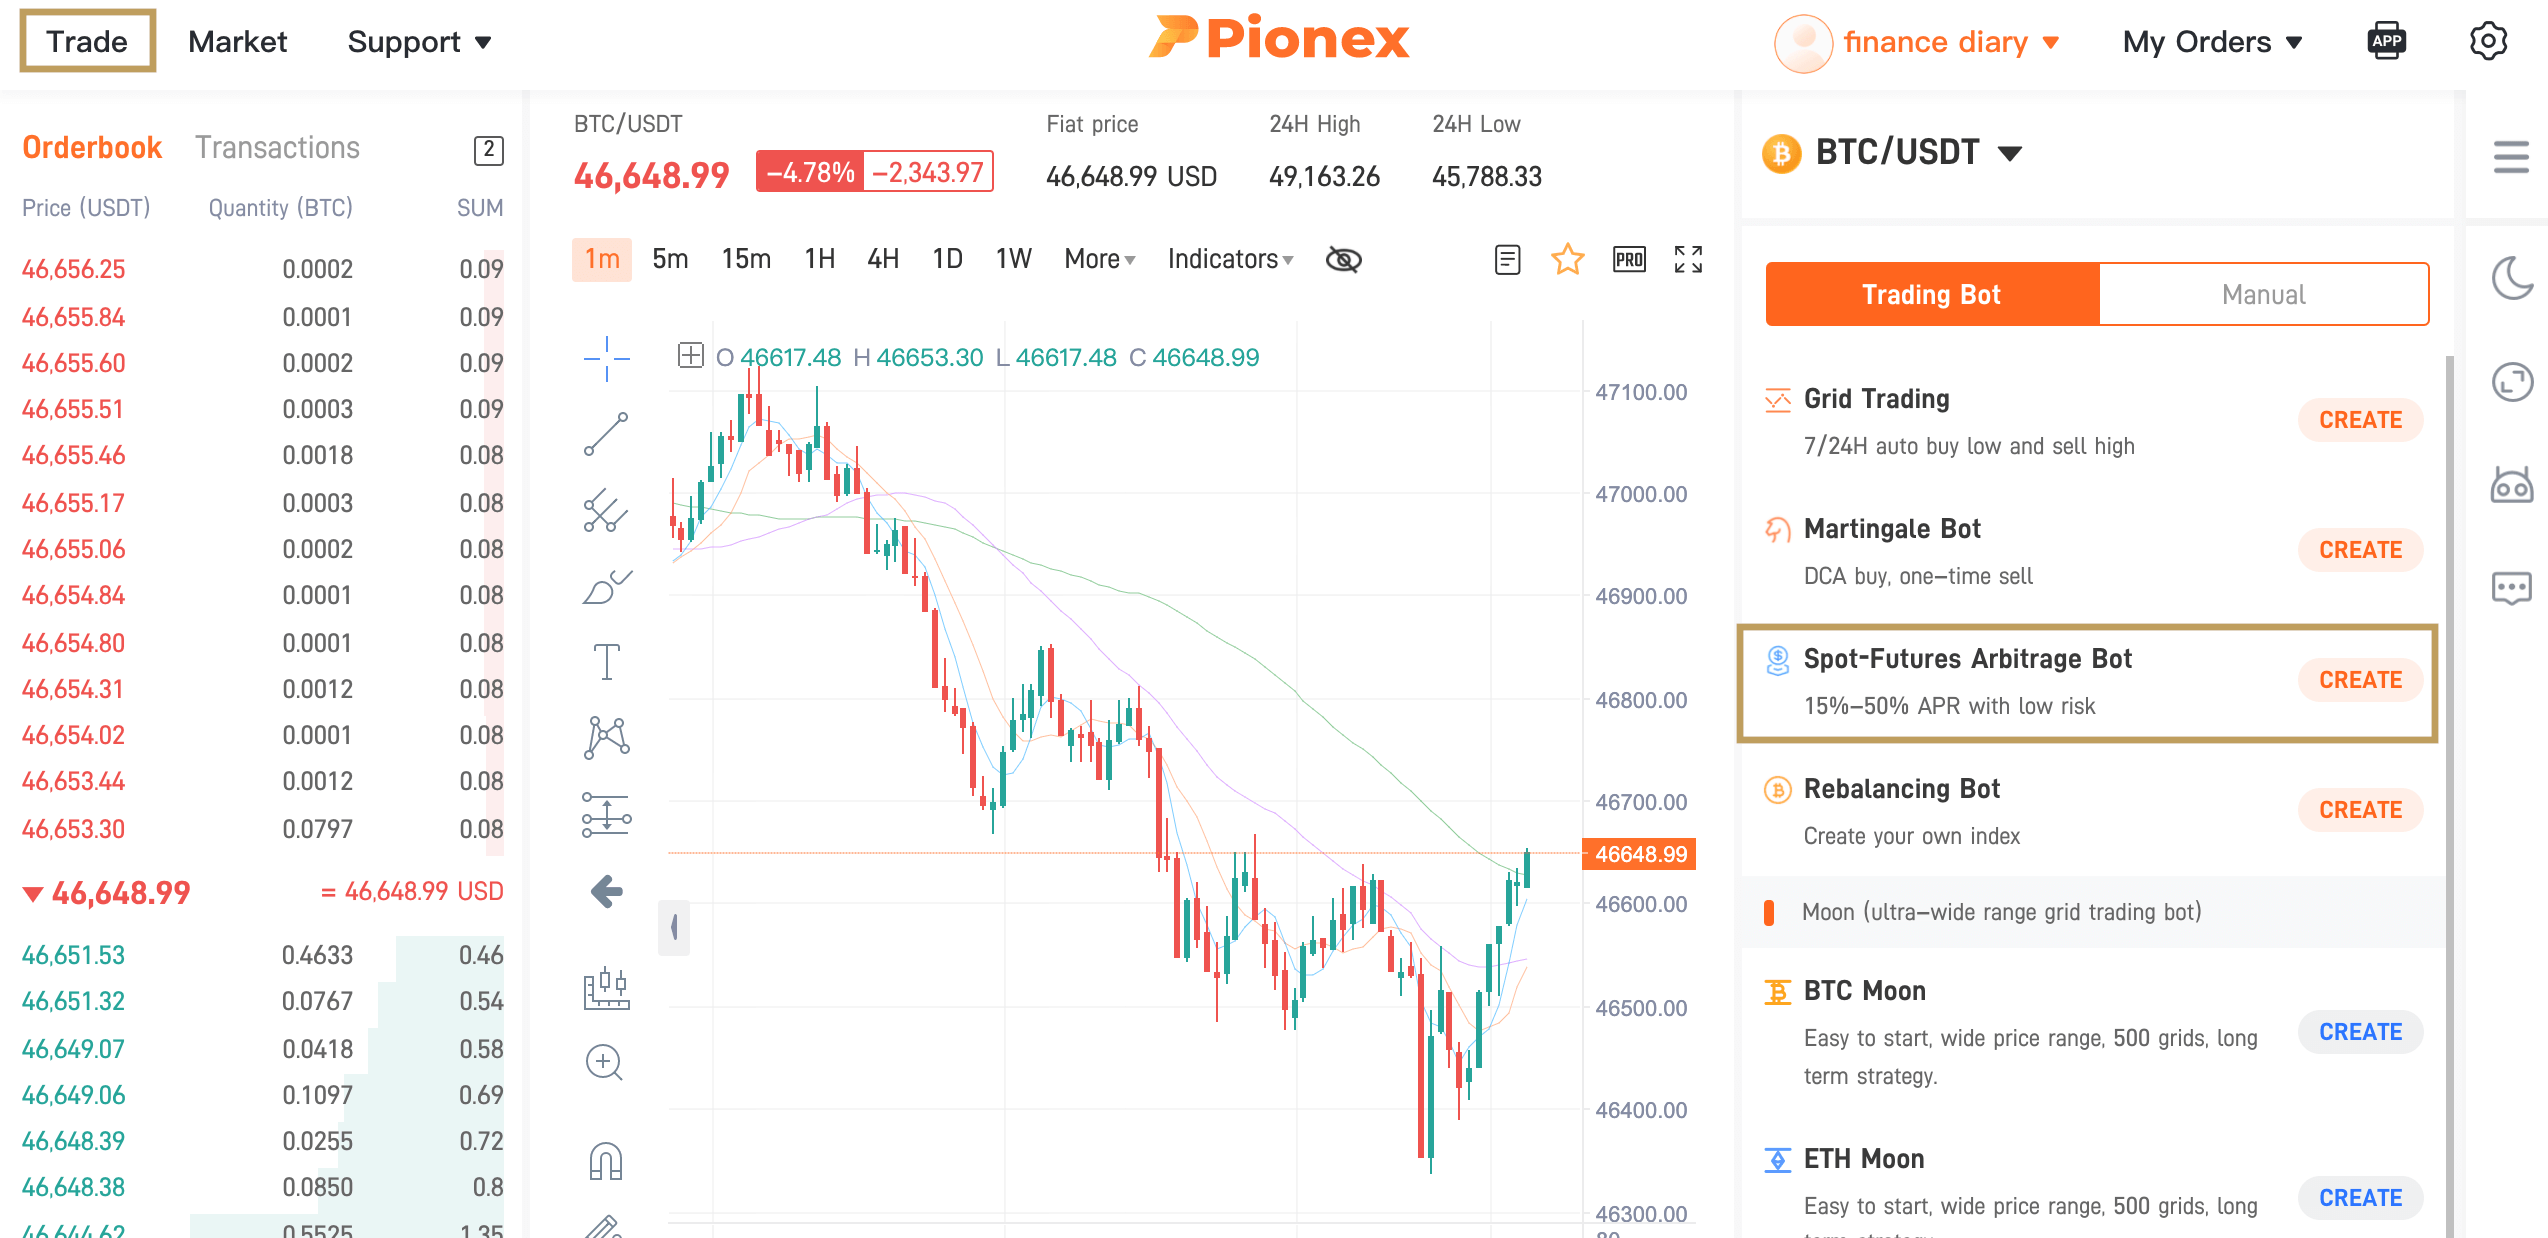 Pionex trading view. The Bitcoin price history over the last hours is visible. On the right side, various trading bots can be started. «Spot Futures Arbitrage Bot» is framed in gold.